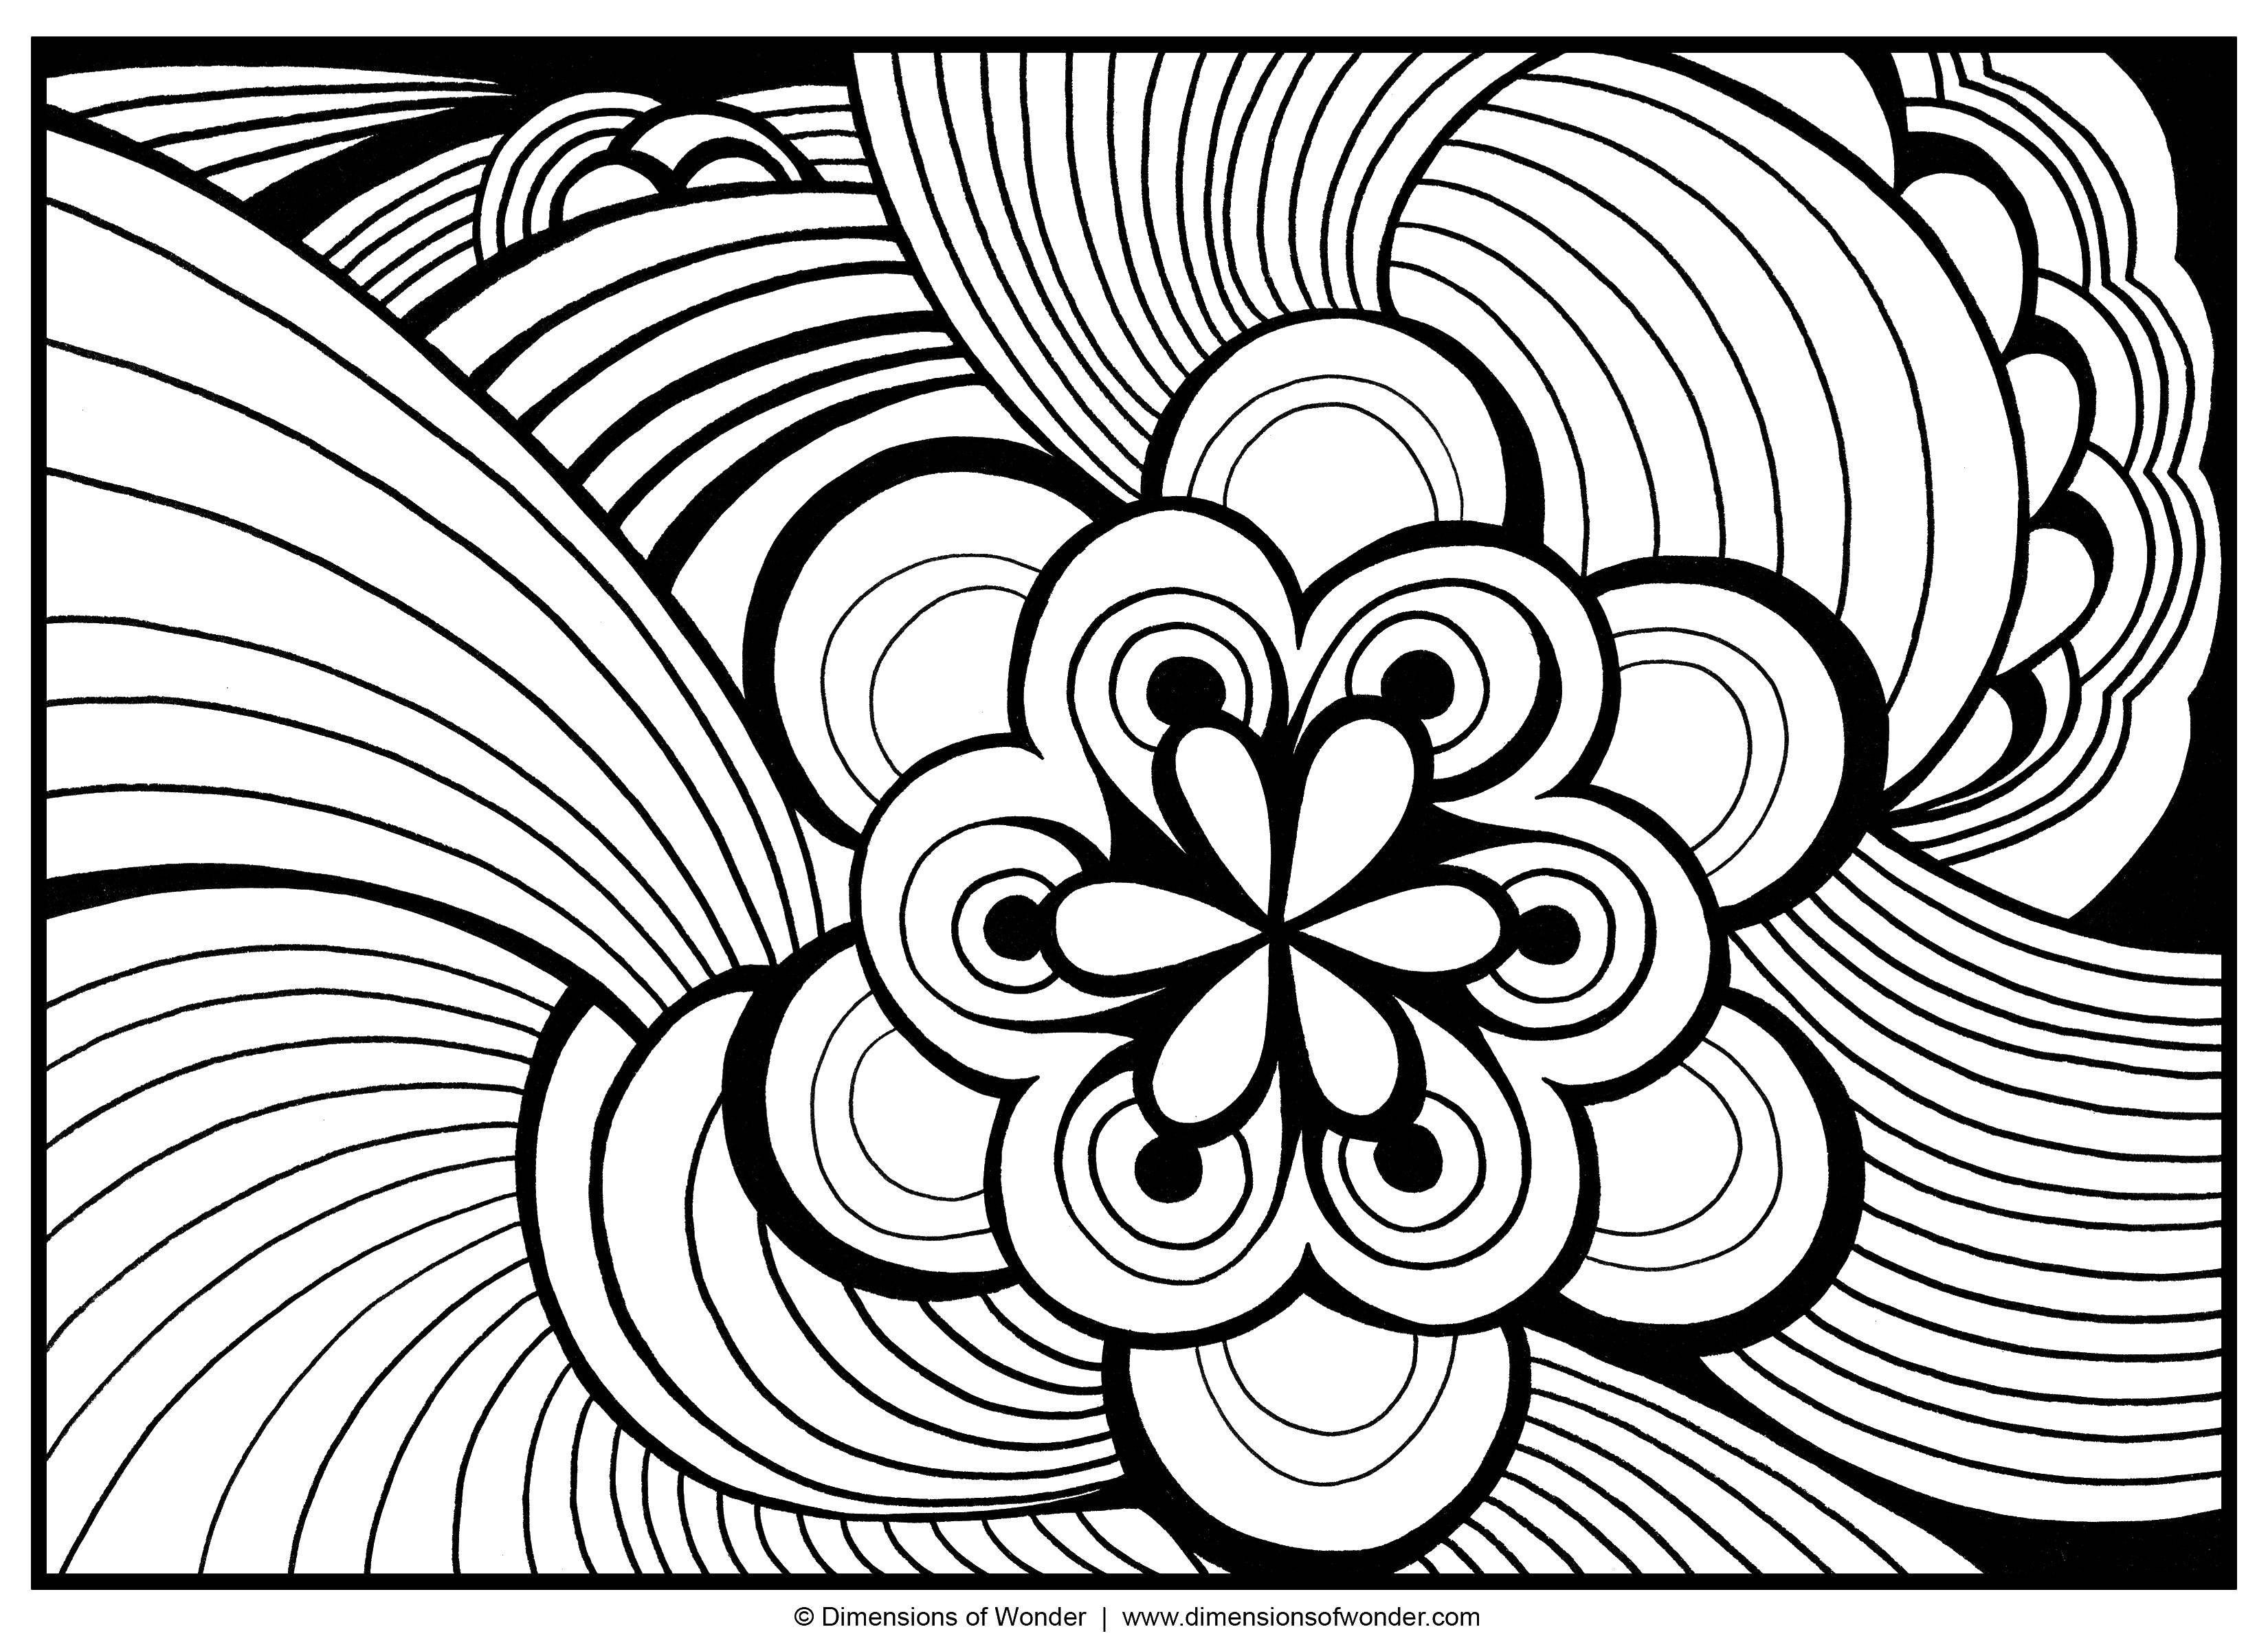 Coloring Flowers, waves. Category coloring antistress. Tags:  waves, flowers, patterns.